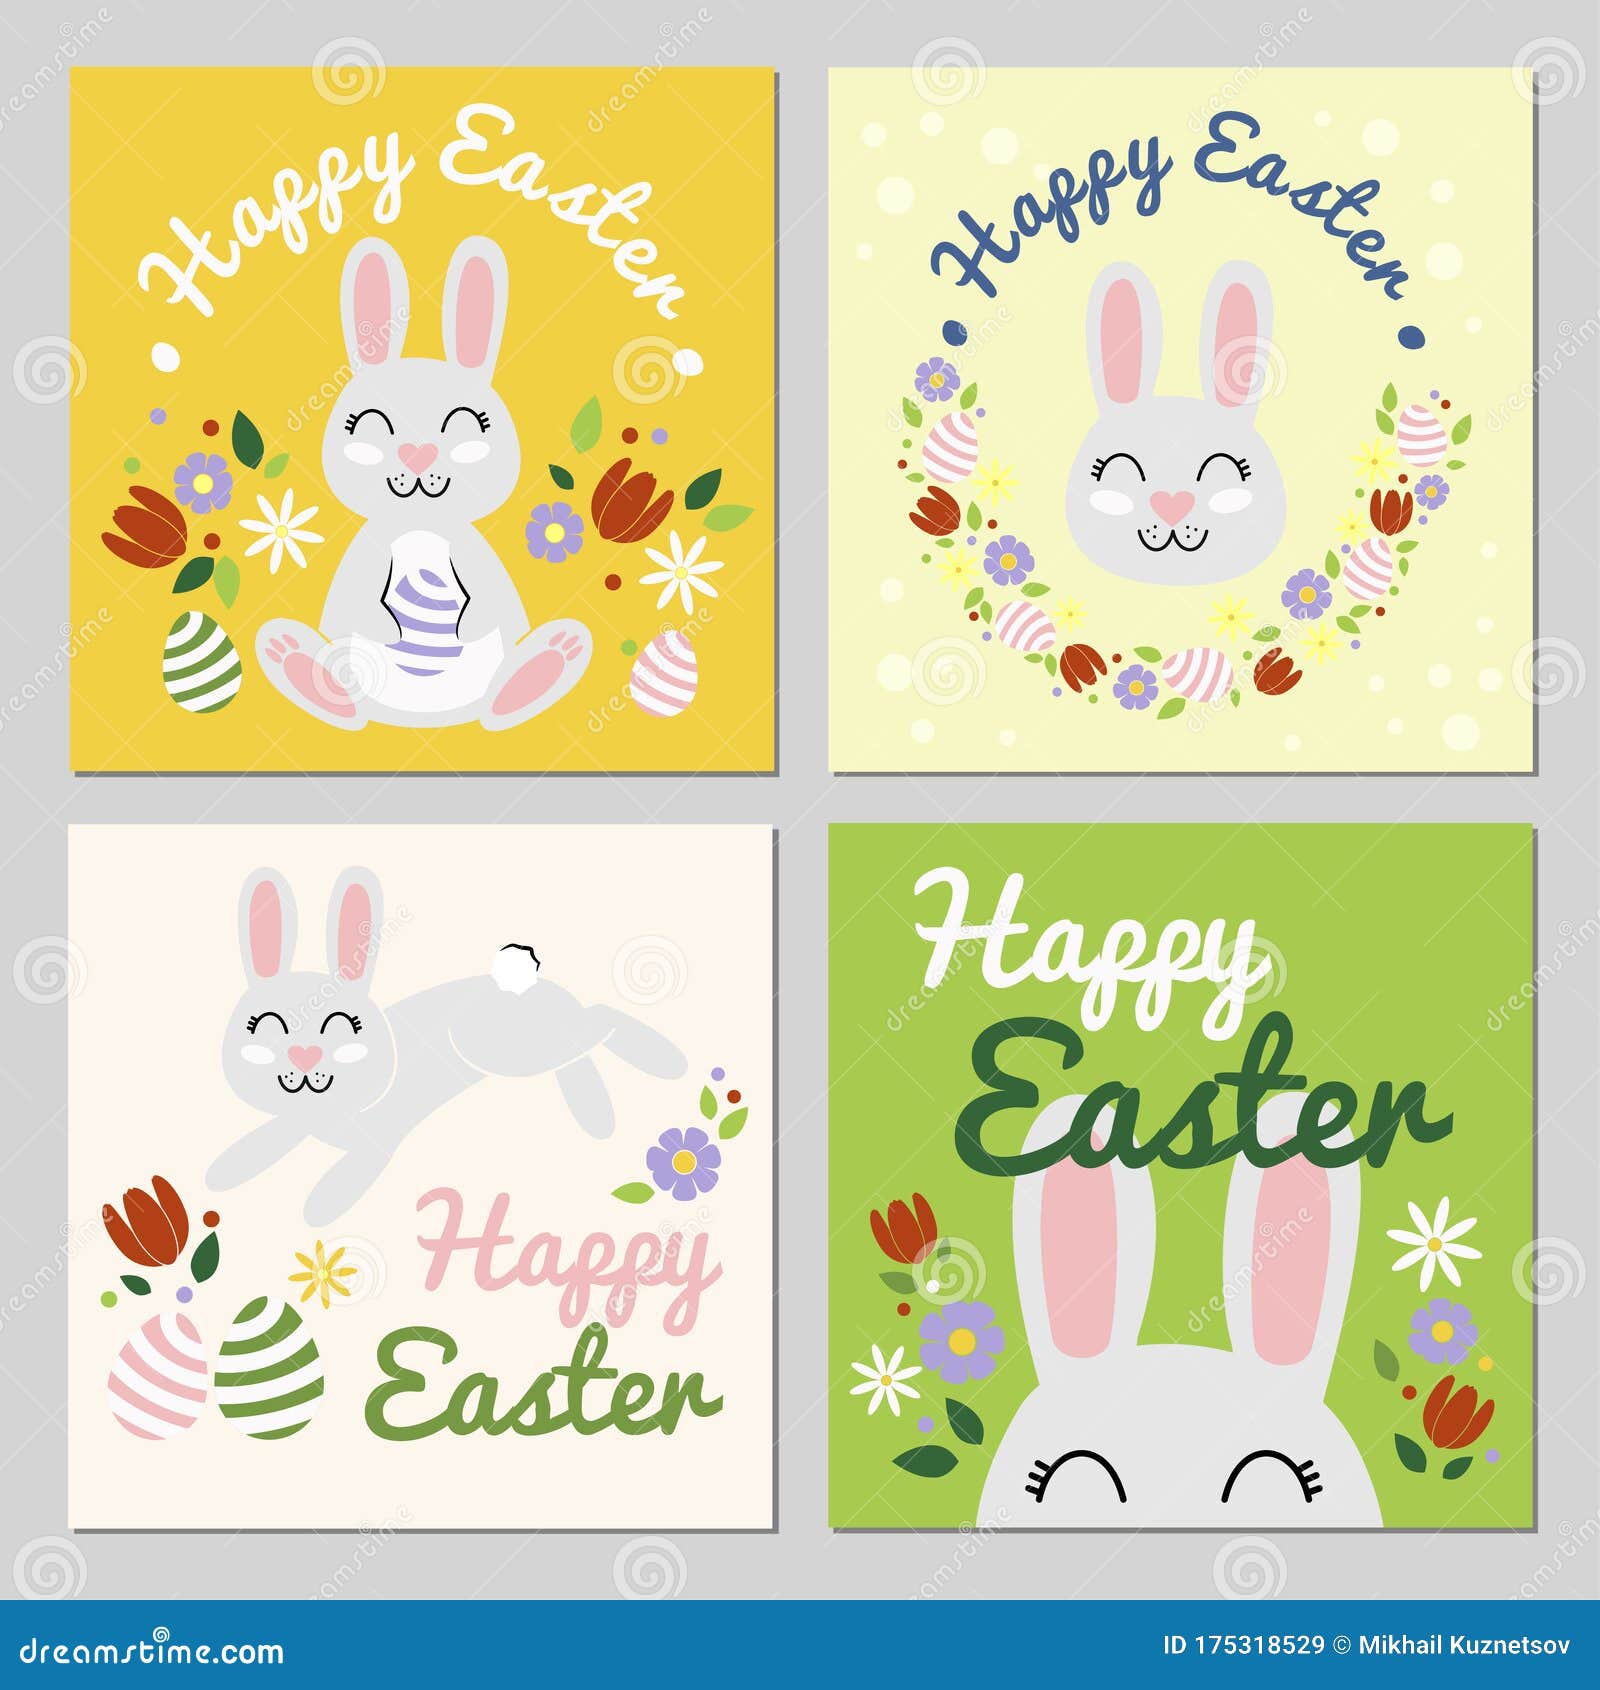 Happy Easter Cards Vector Set To Celebrate Easter. 4 Cards with Bunny ...